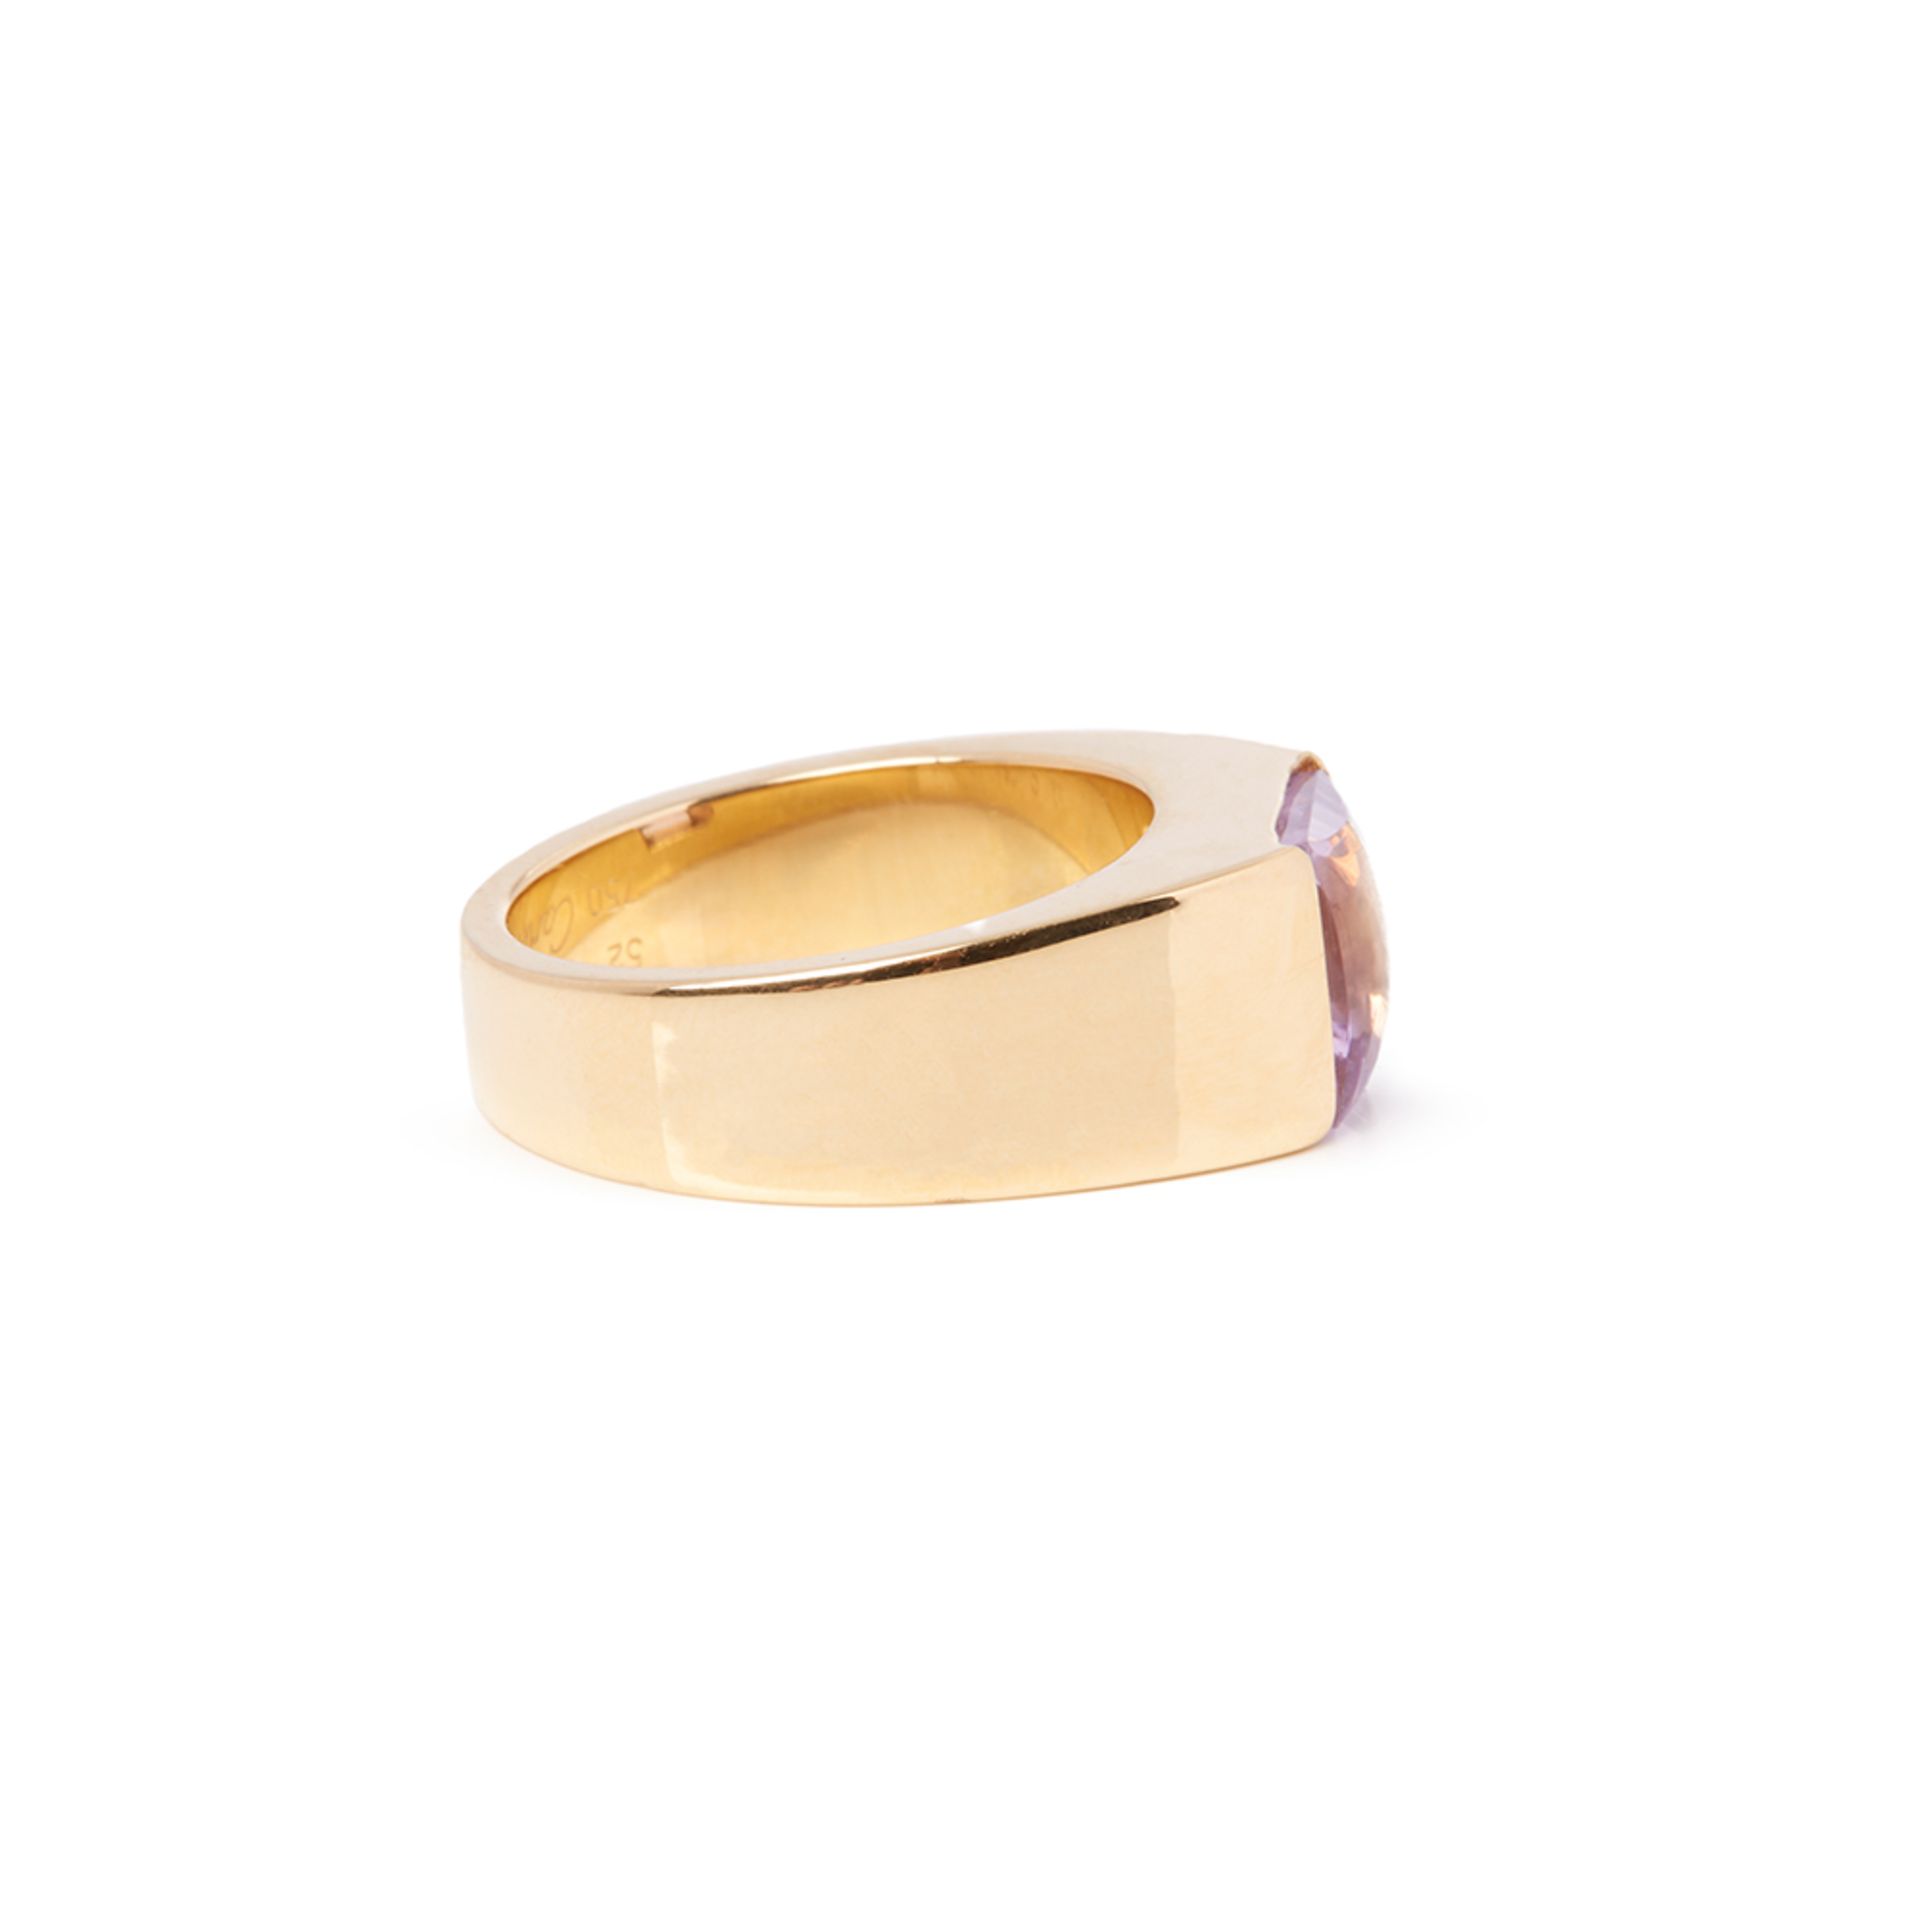 Cartier 18k Yellow Gold Amethyst Tank Ring - Image 4 of 6